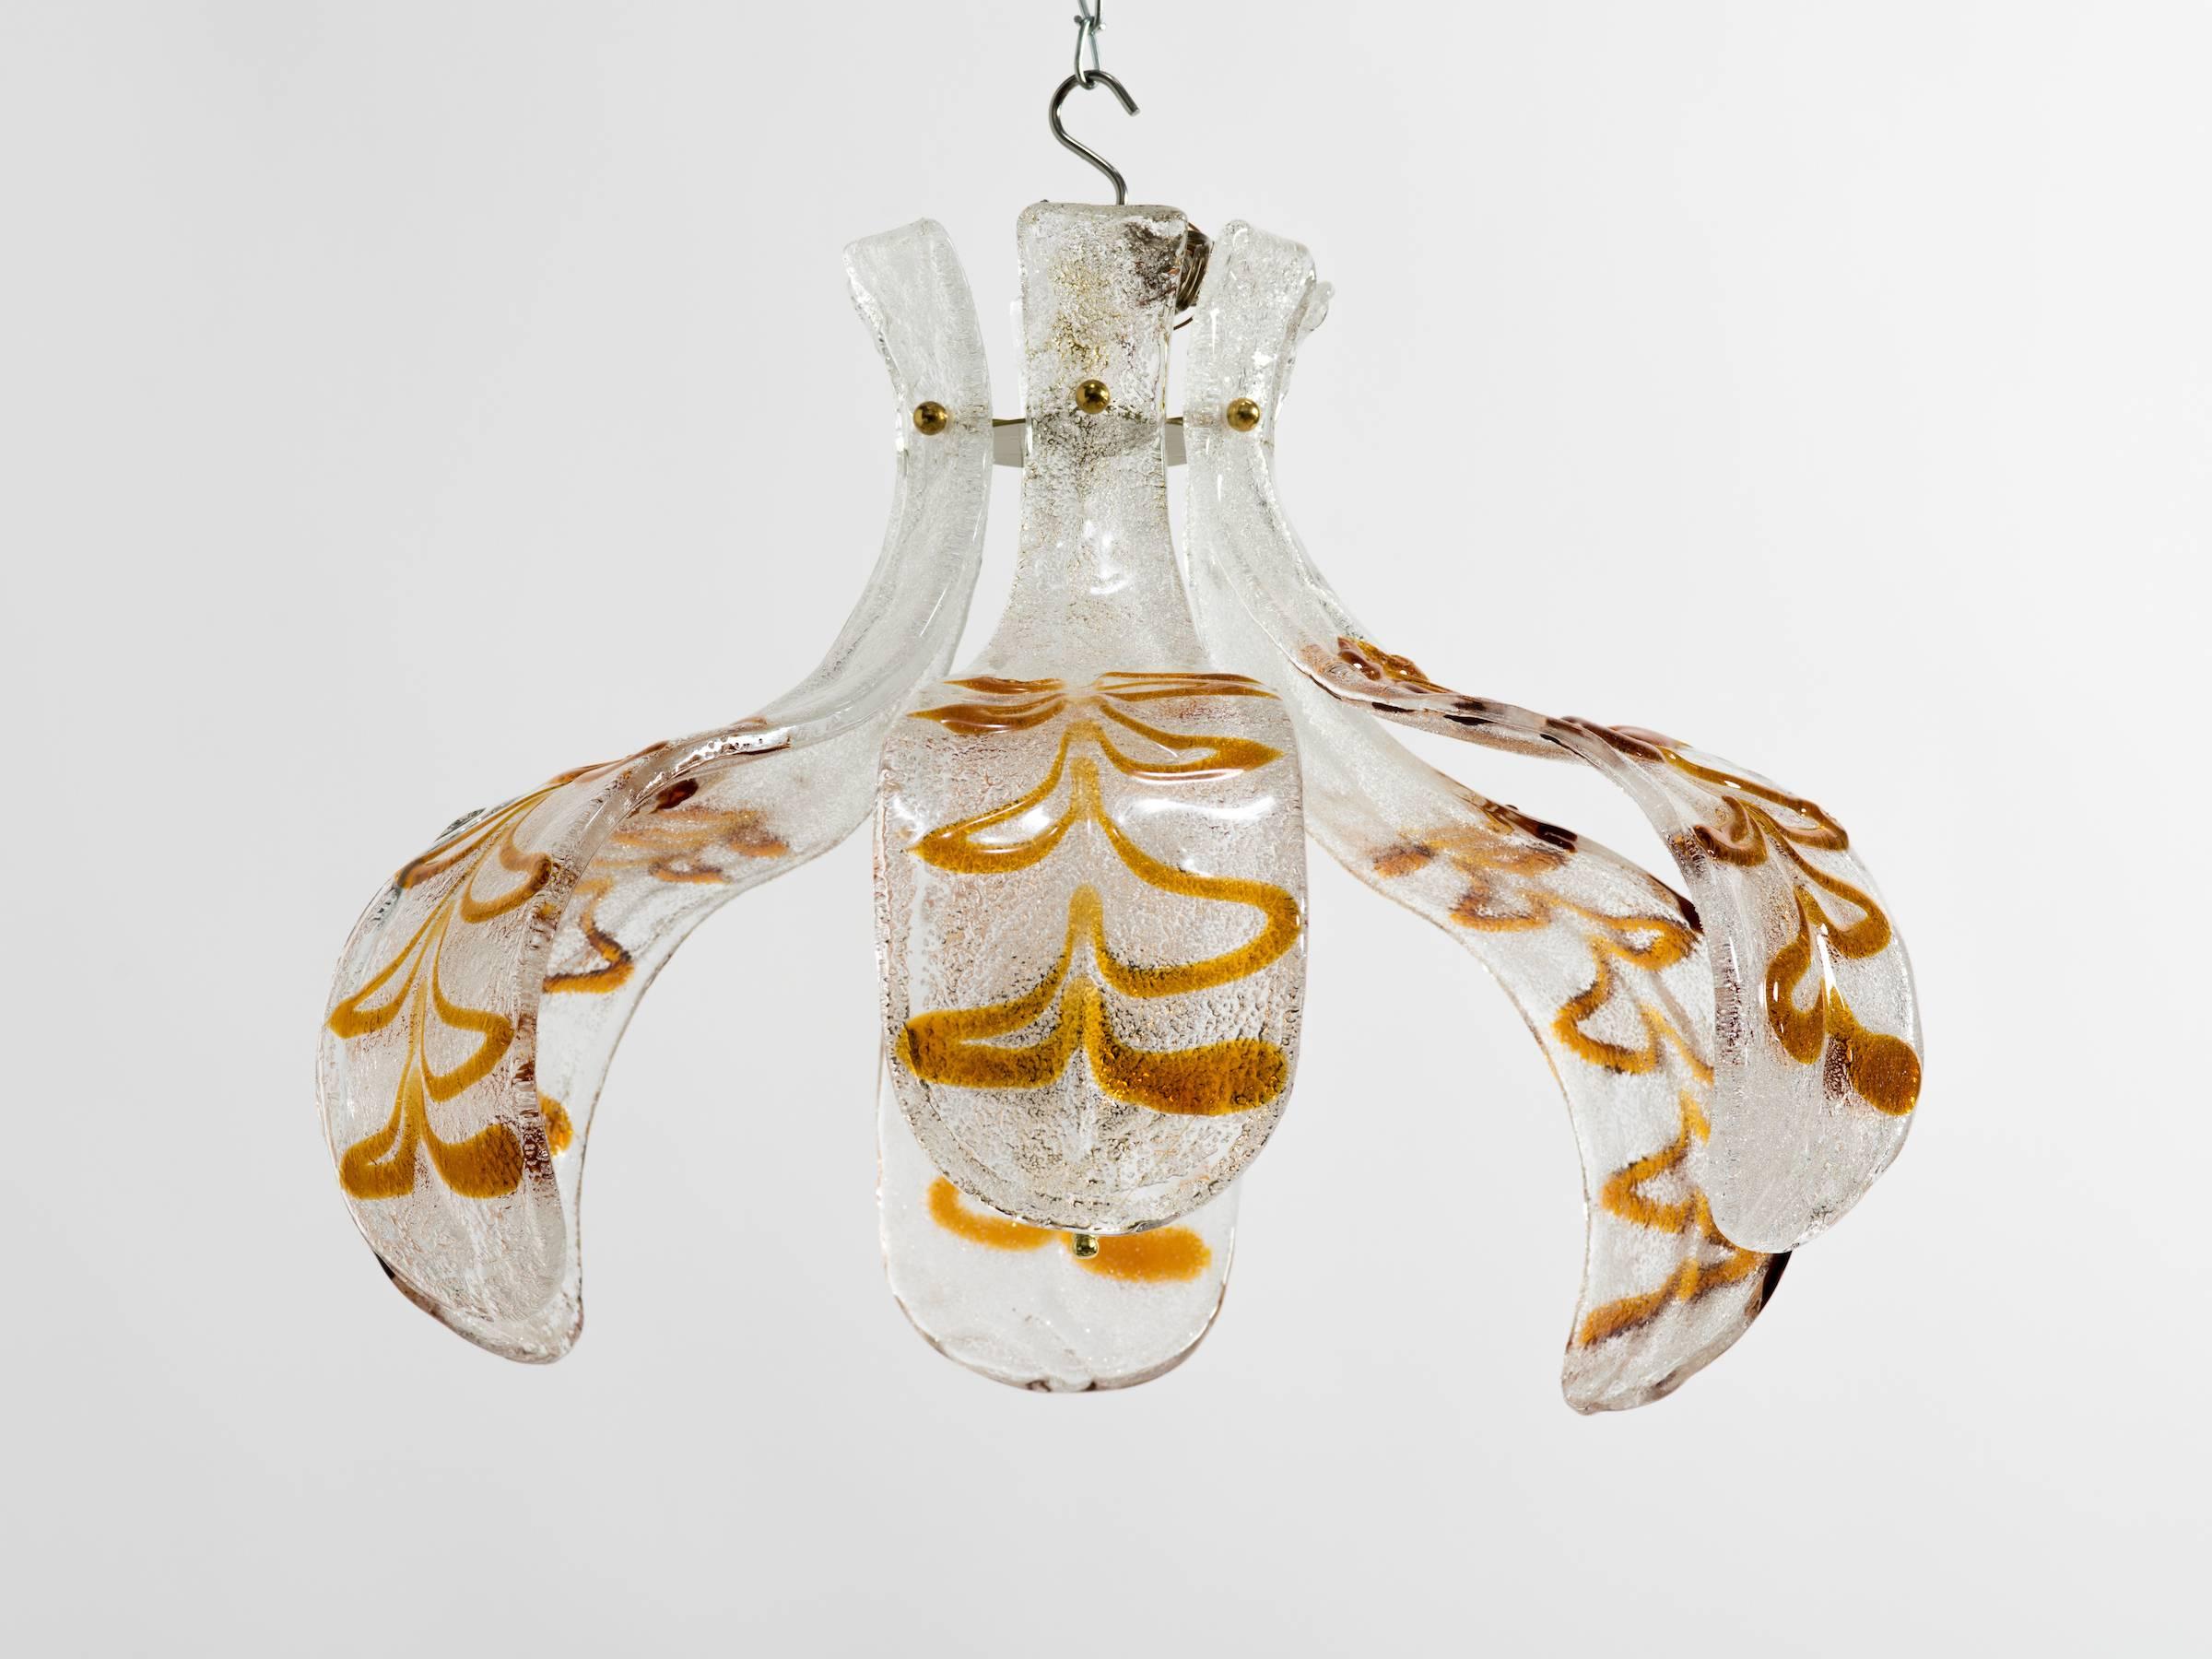 Murano glass leaf chandelier from the 1970s. Never used, when i purchased this fixture it was still in the box.